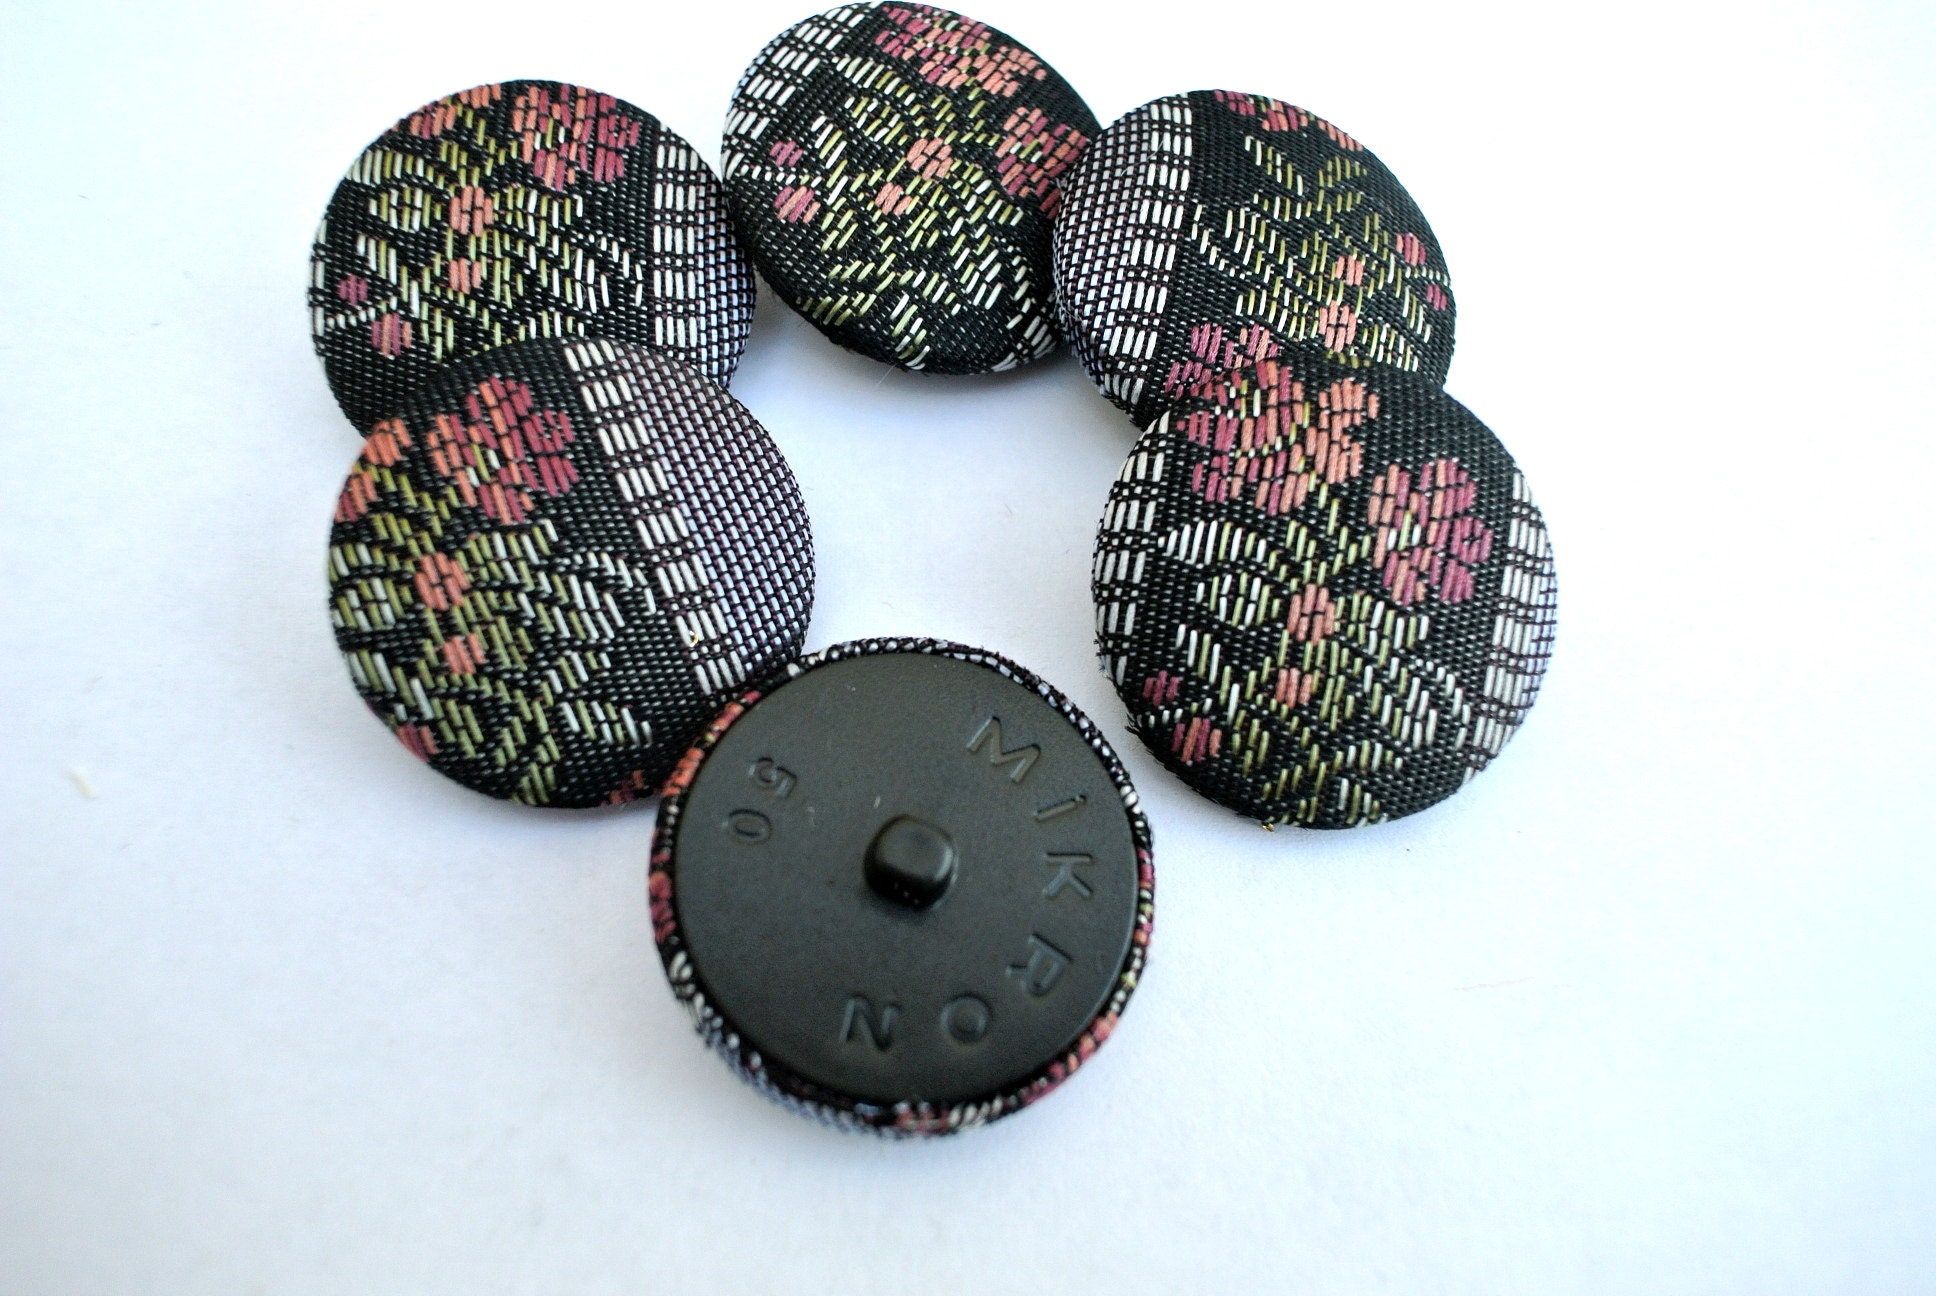 Black Leather Buttons 23mm | Harts Fabric